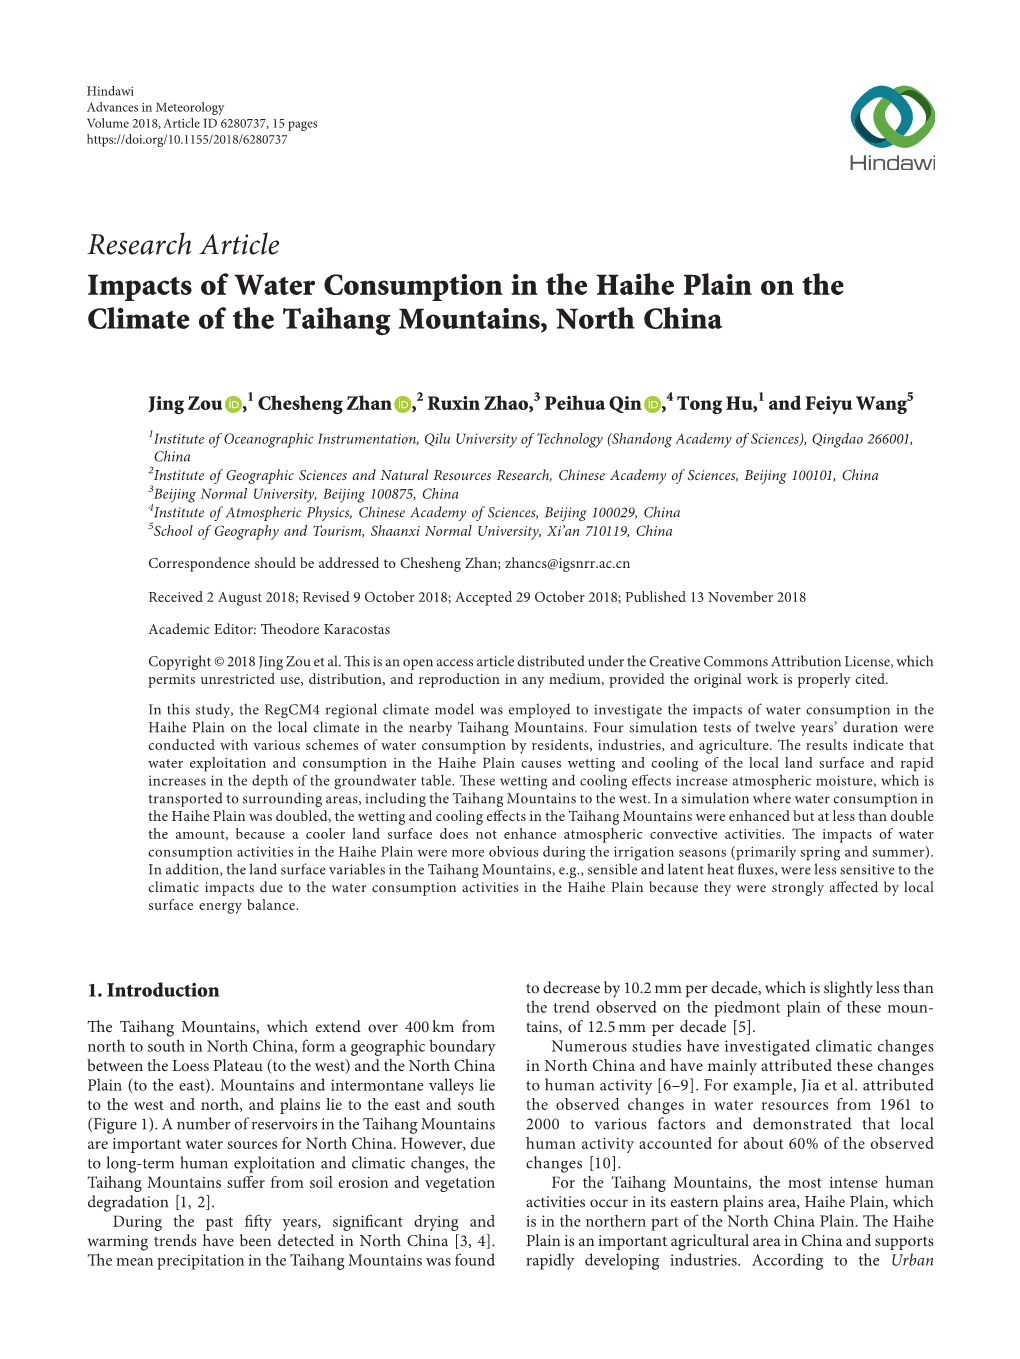 Impacts of Water Consumption in the Haihe Plain on the Climate of the Taihang Mountains, North China